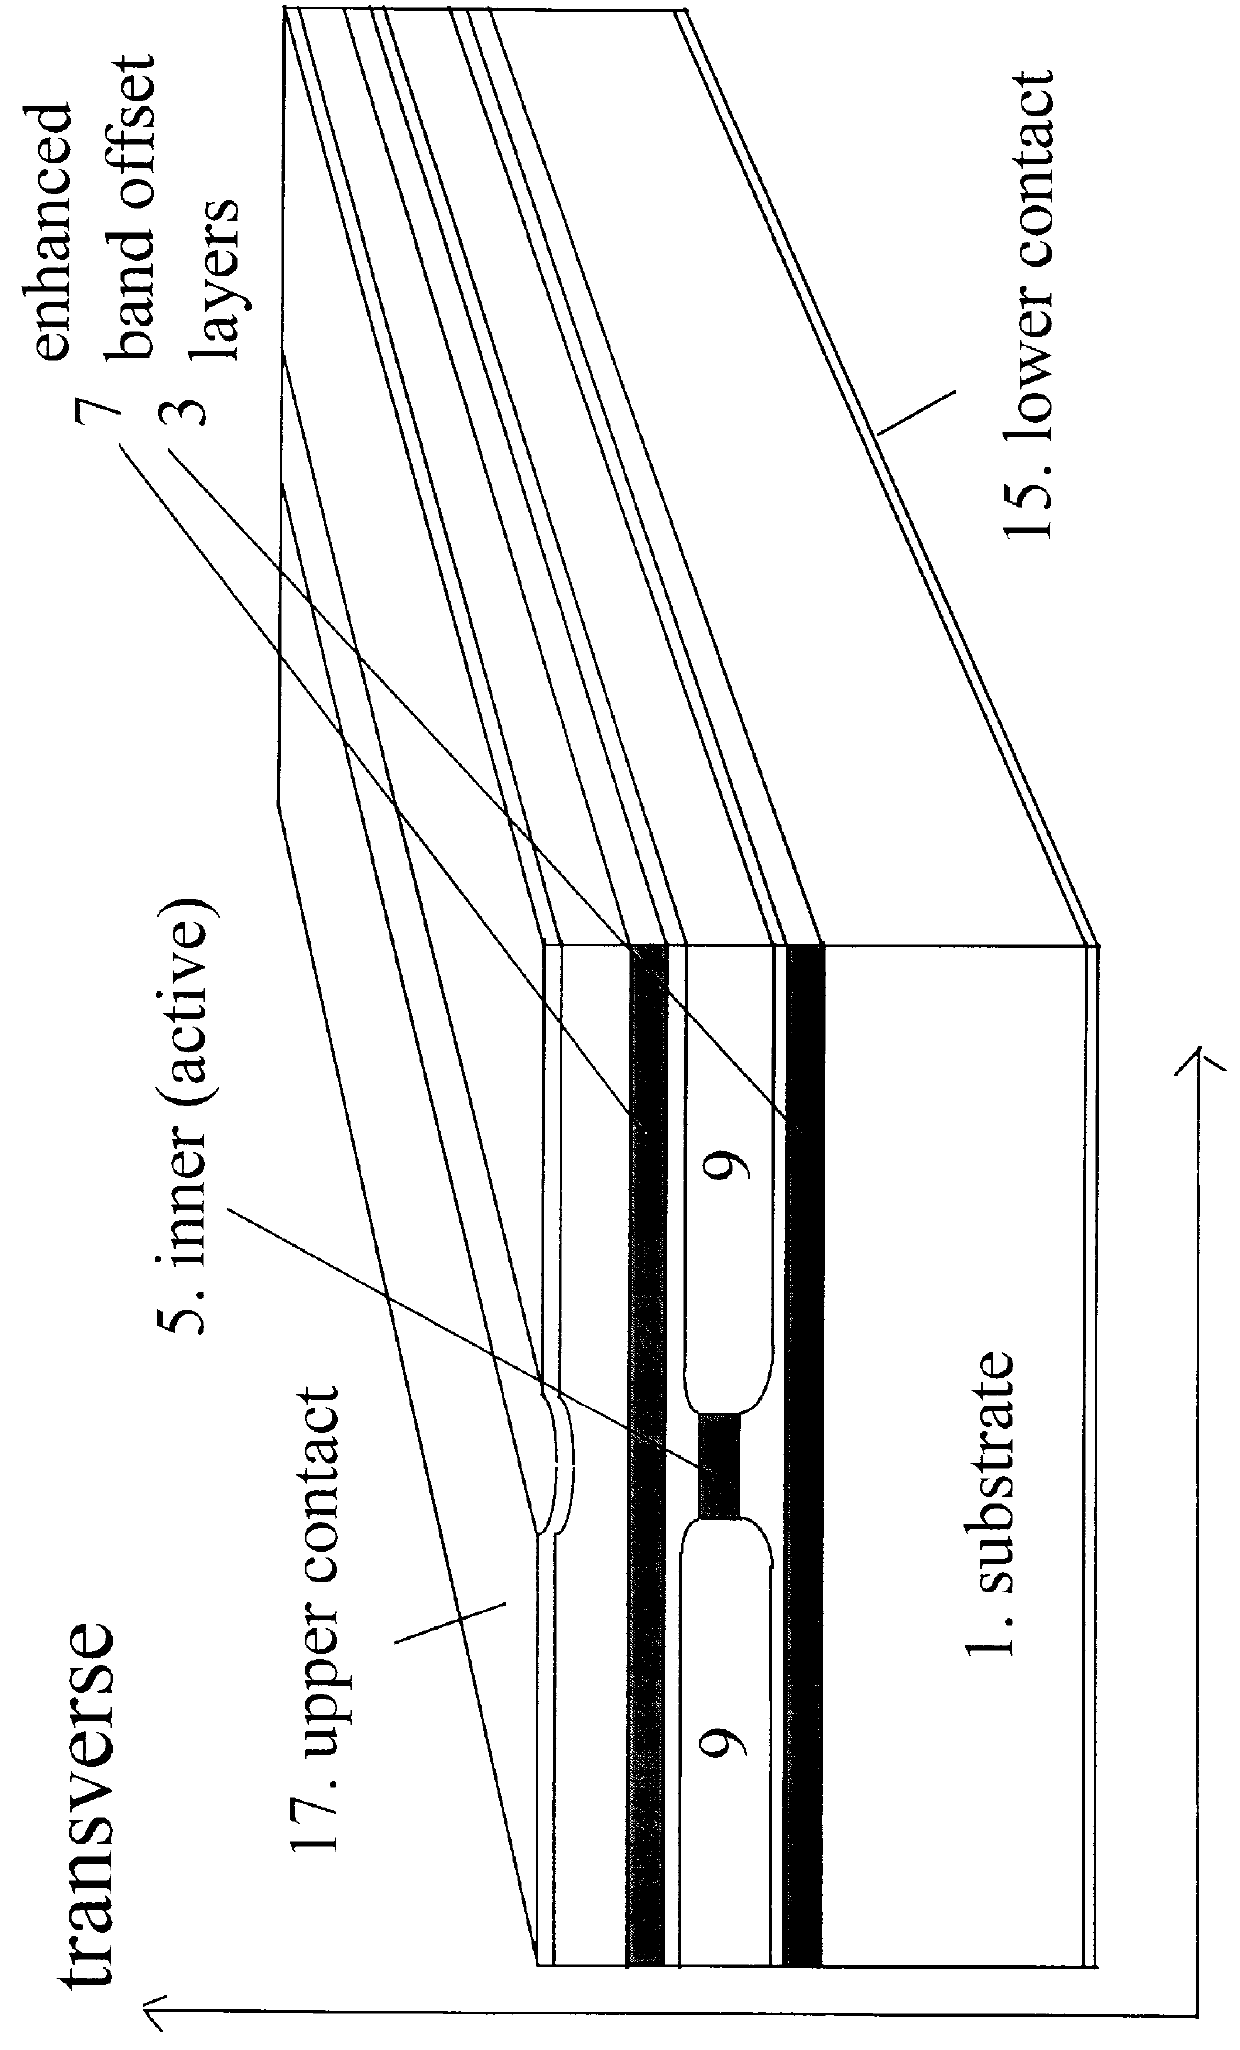 Buried heterostructure with aluminum-free active layer and method of making same